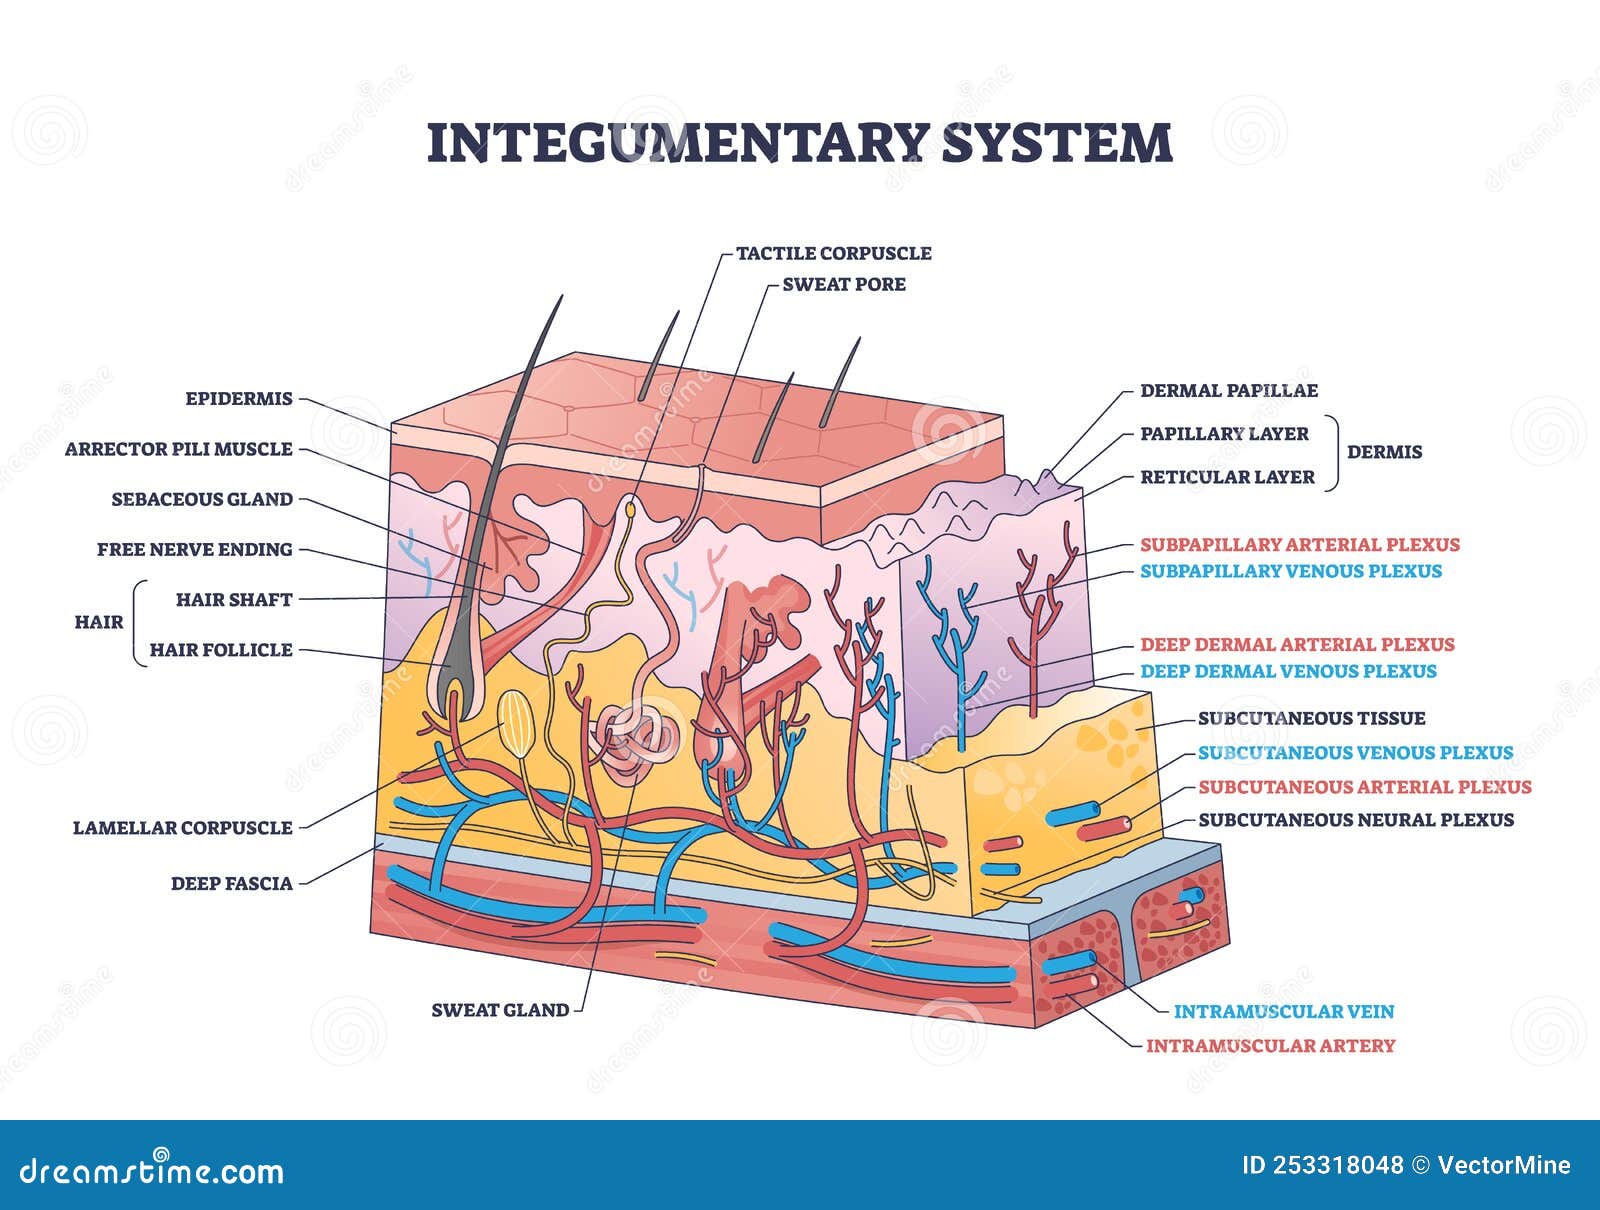 integumentary system with epidermis surface layer structure outline diagram